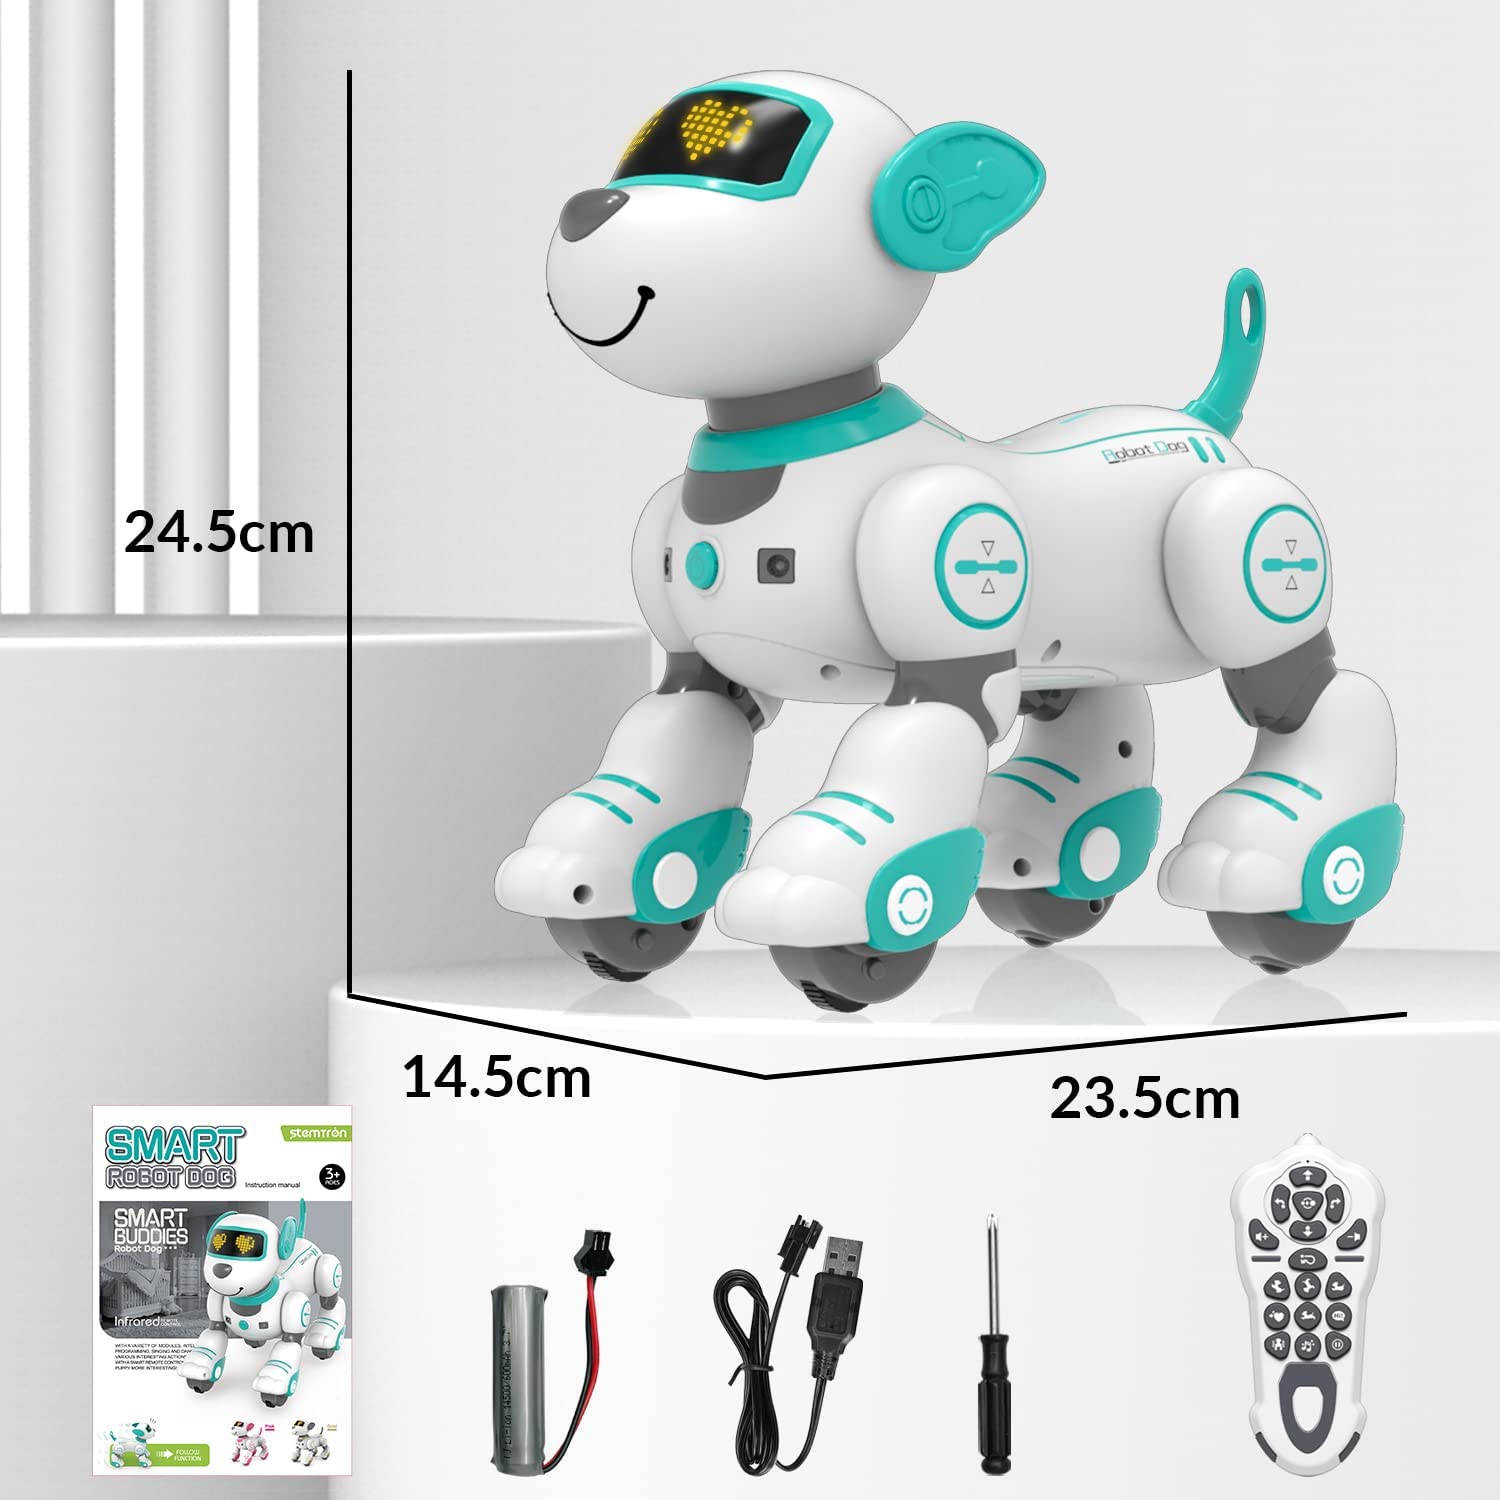 STEMTRON Programmable Interactive & Smart Dancing Remote Control Robot Dog Toy(Blue)